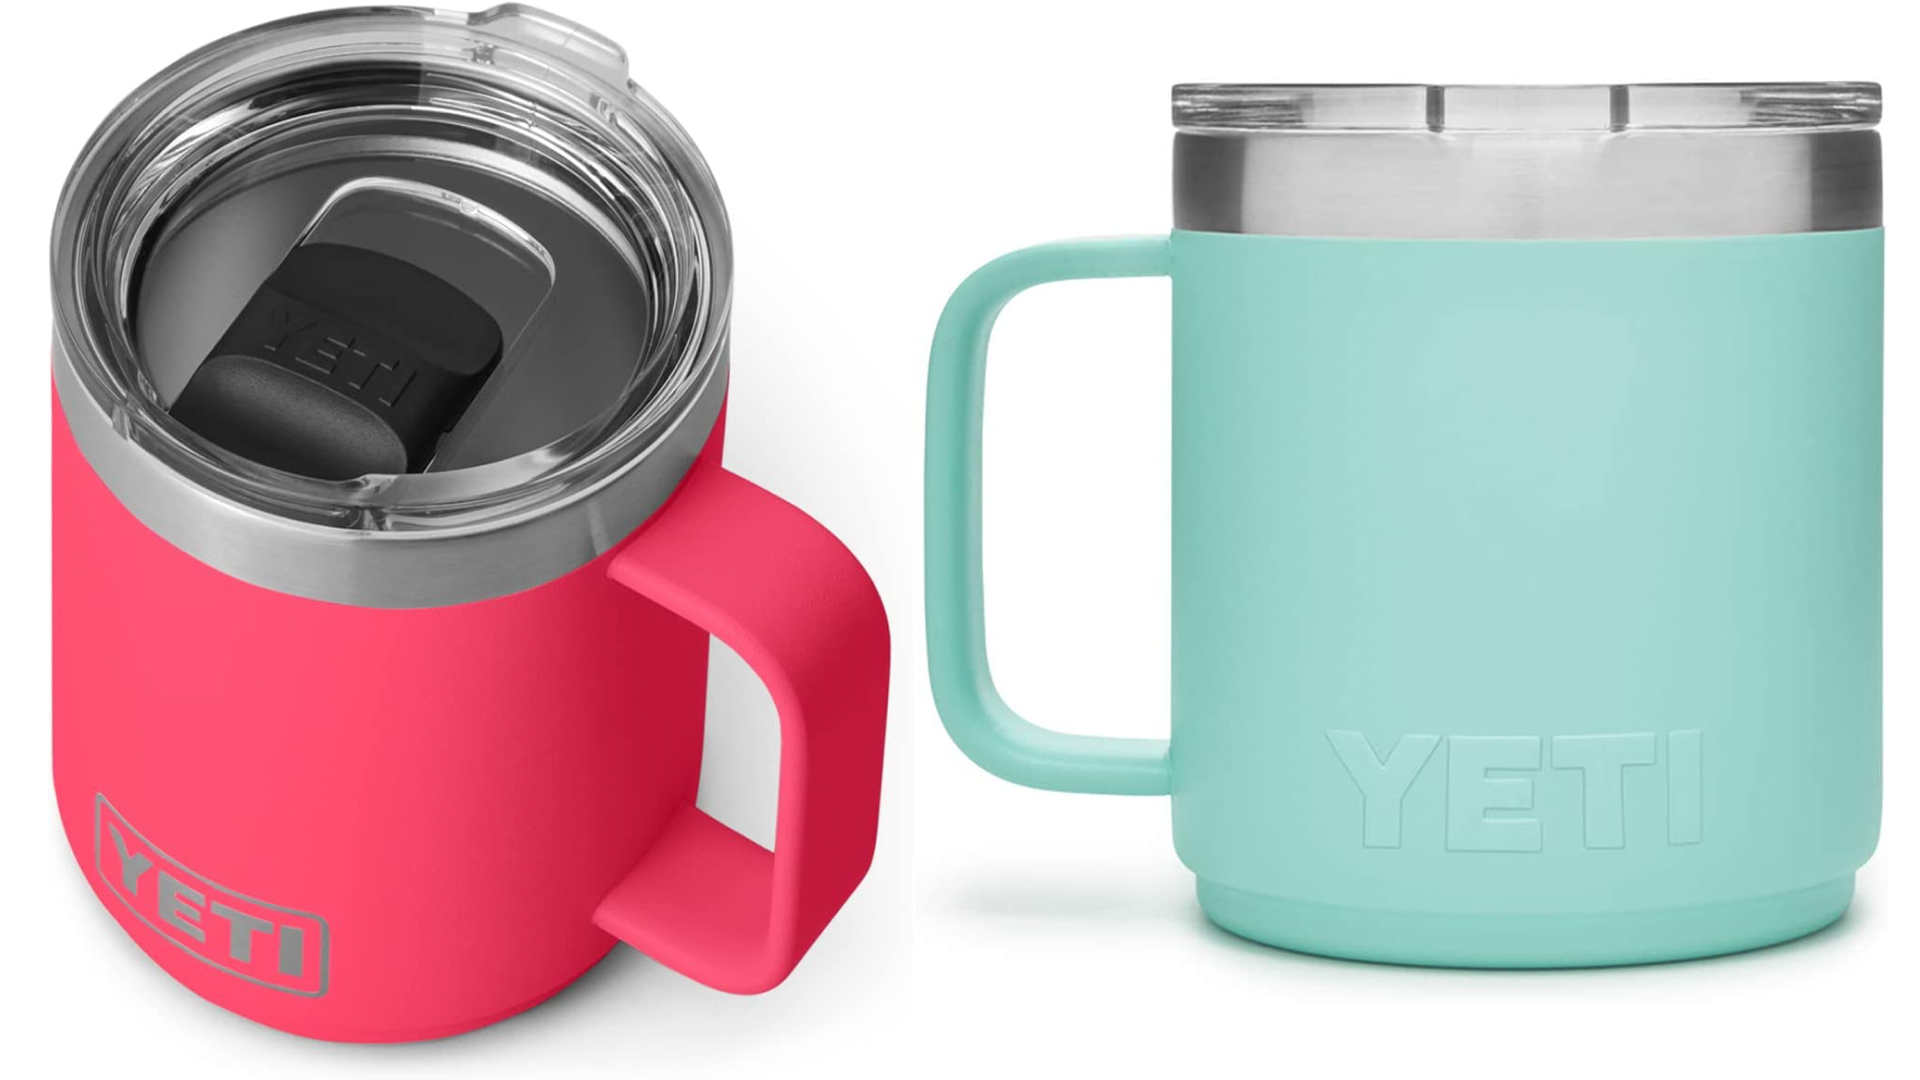 USB Coffee Cup That Heats, Stirs & Charges Itself For Mobile Use